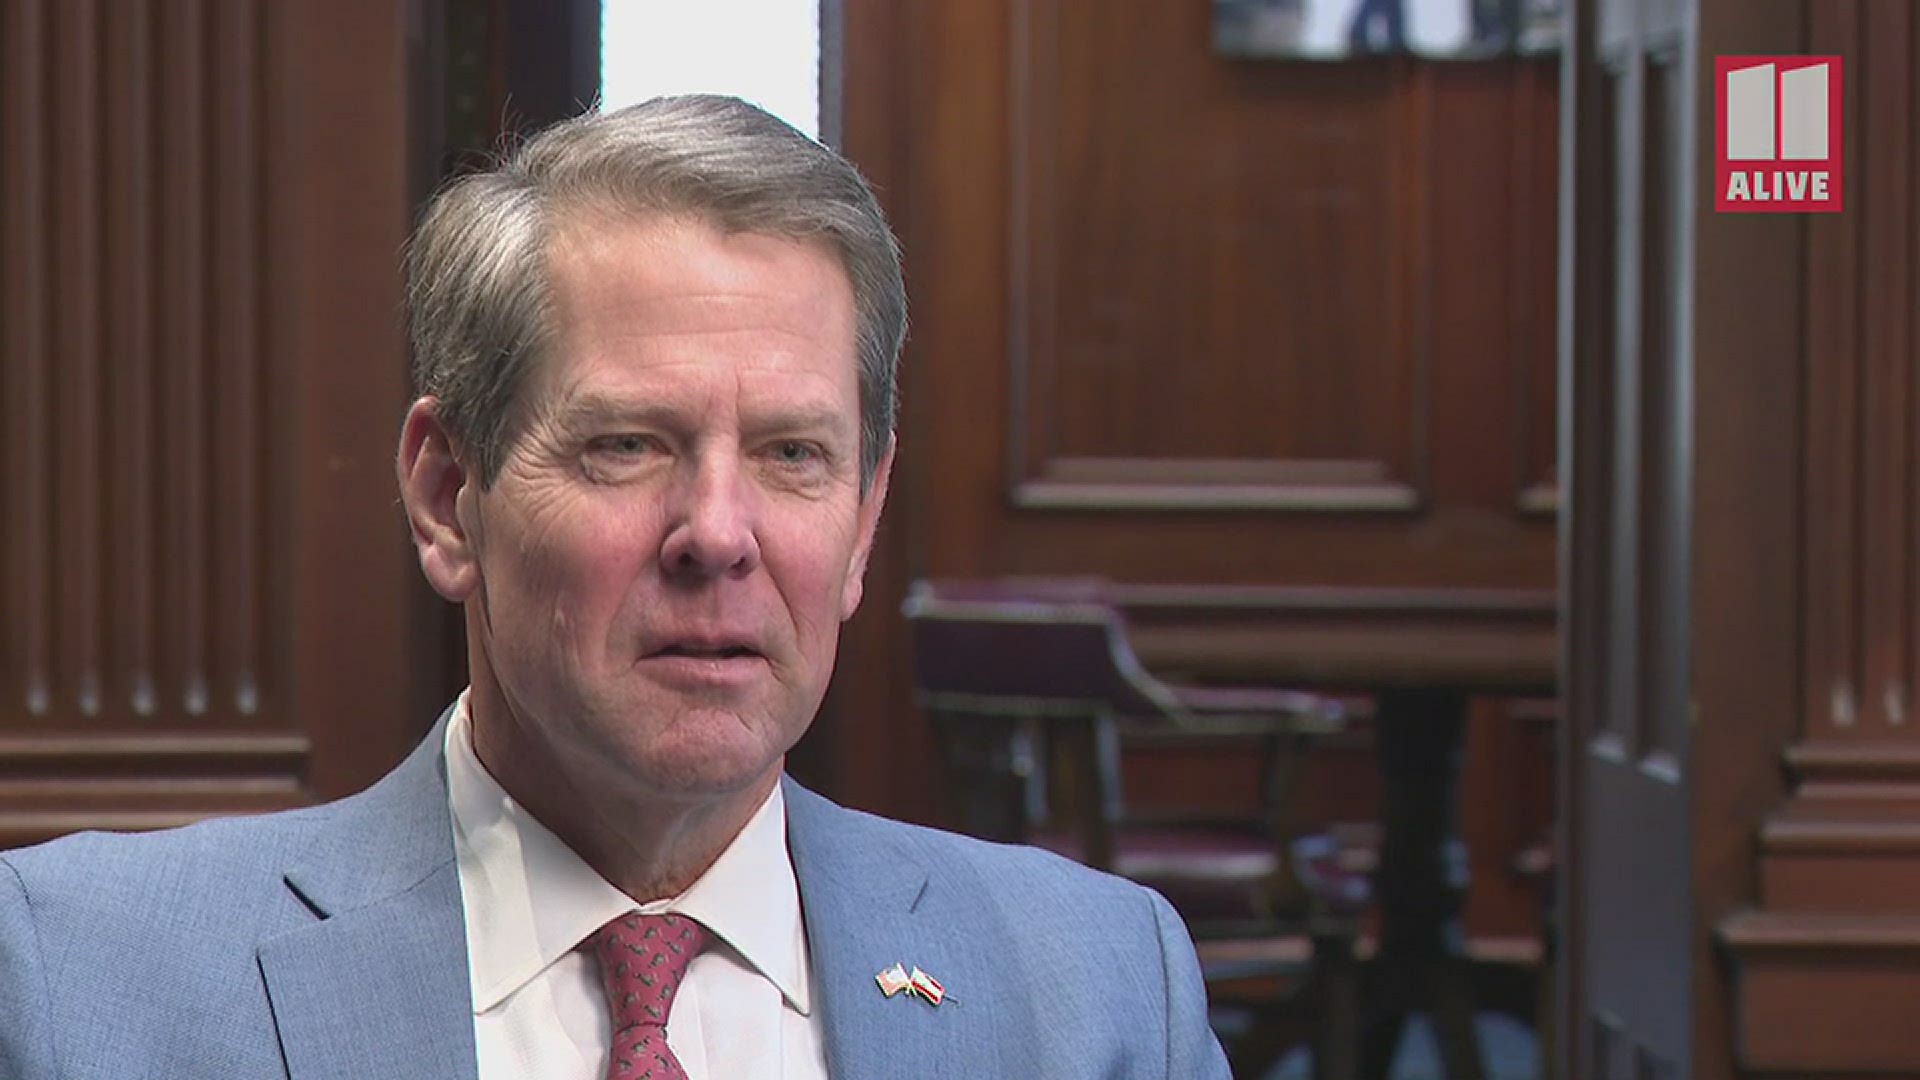 Georgia Gov. Brian Kemp discussed the state's plans for additional vaccine doses announced by the White House and how they plan to distribute them.